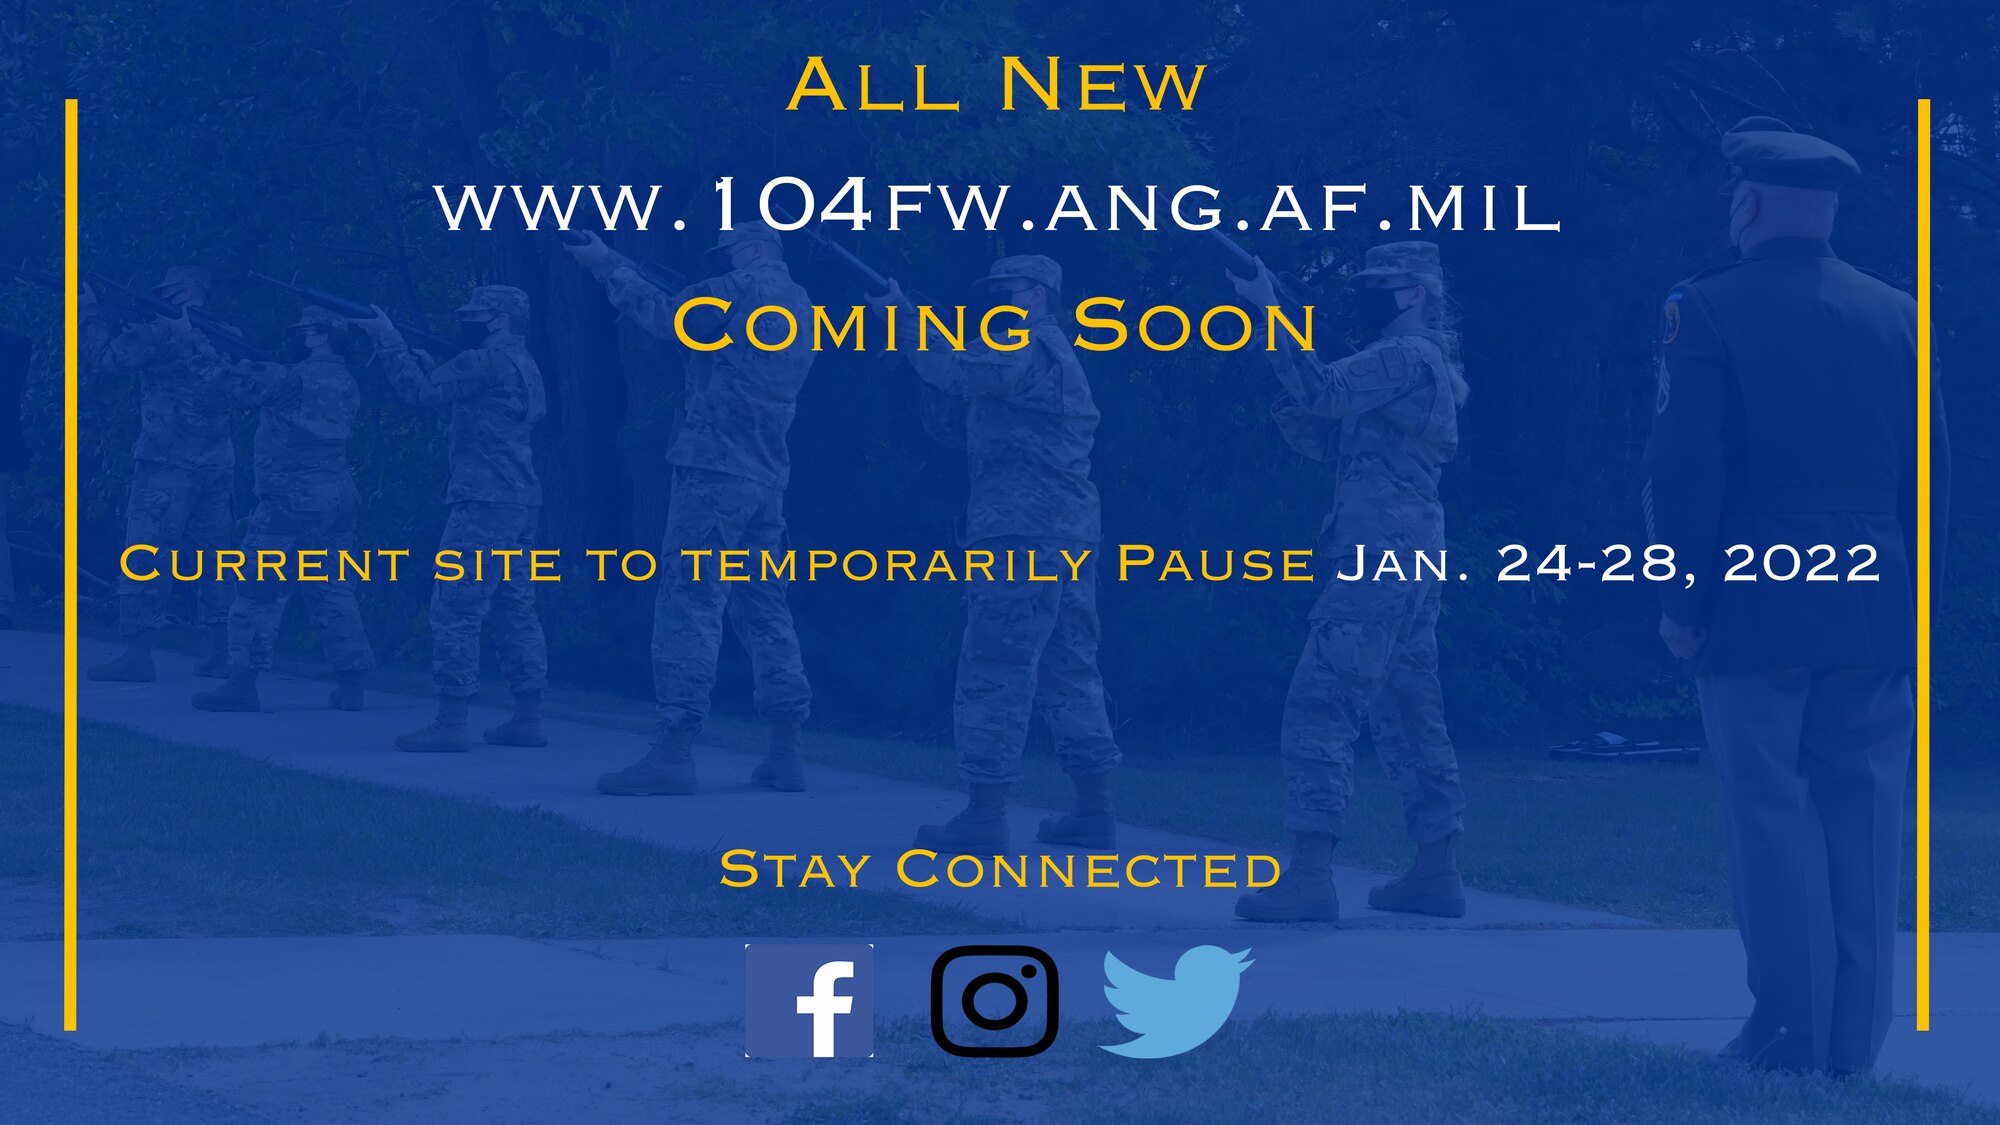 The 104th Fighter Wing official website (www.104fw.ang.af.mil) is scheduled to be redesigned by Air Force officials starting Jan. 24, 2022. Many new features will be added to the site, including full-frame photo galleries, updated slideshows and revamped video capabilities.